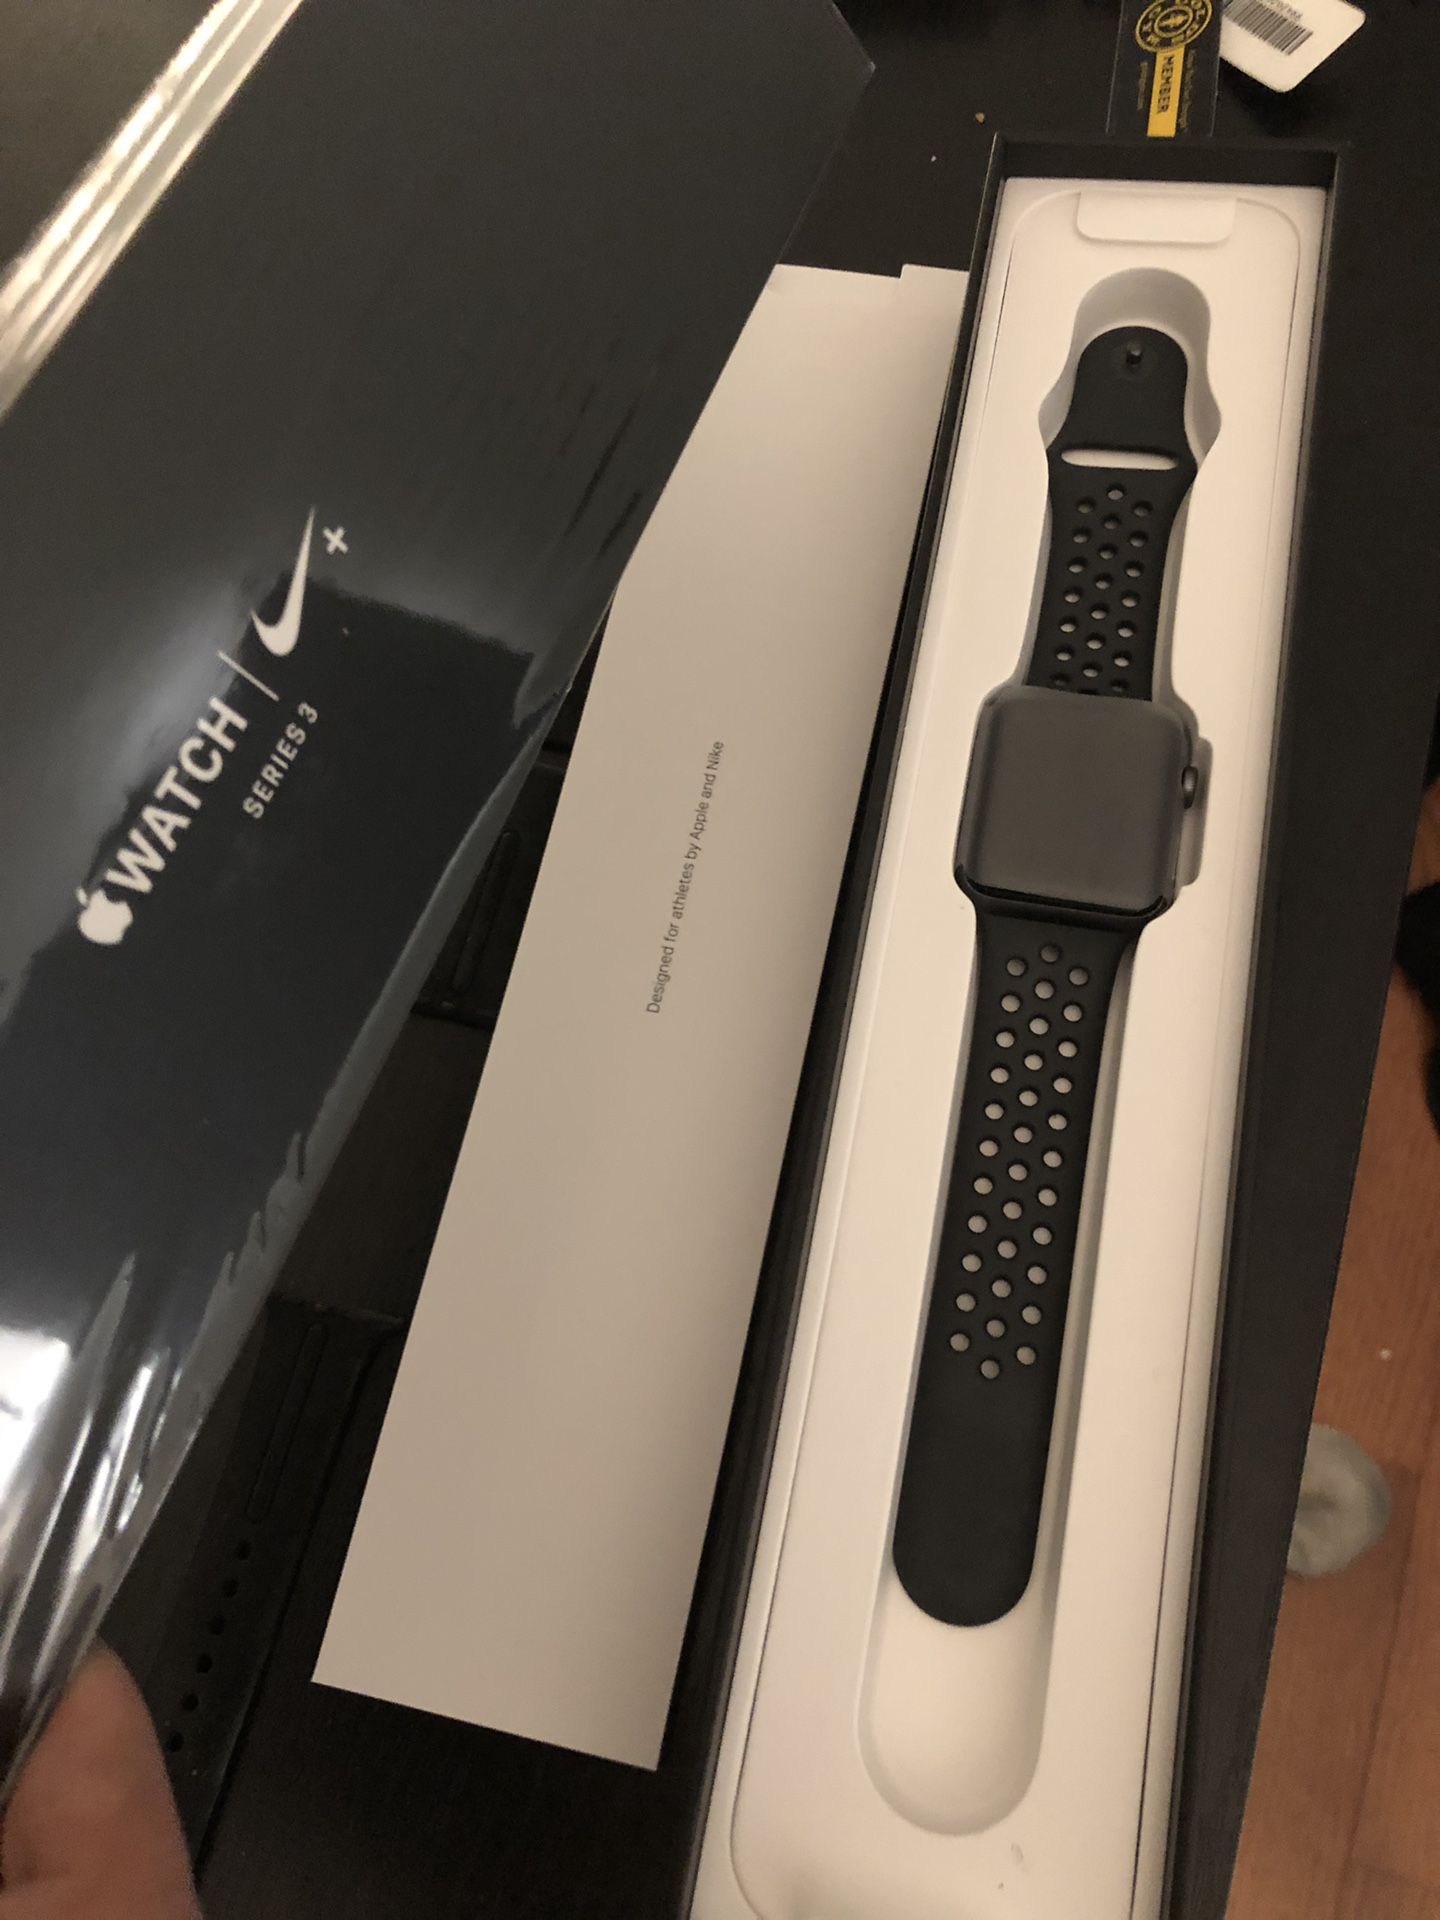 BRAND NEW! (Open box) Apple Watch Series 3 Nike+ 42mm Case - Space Gray